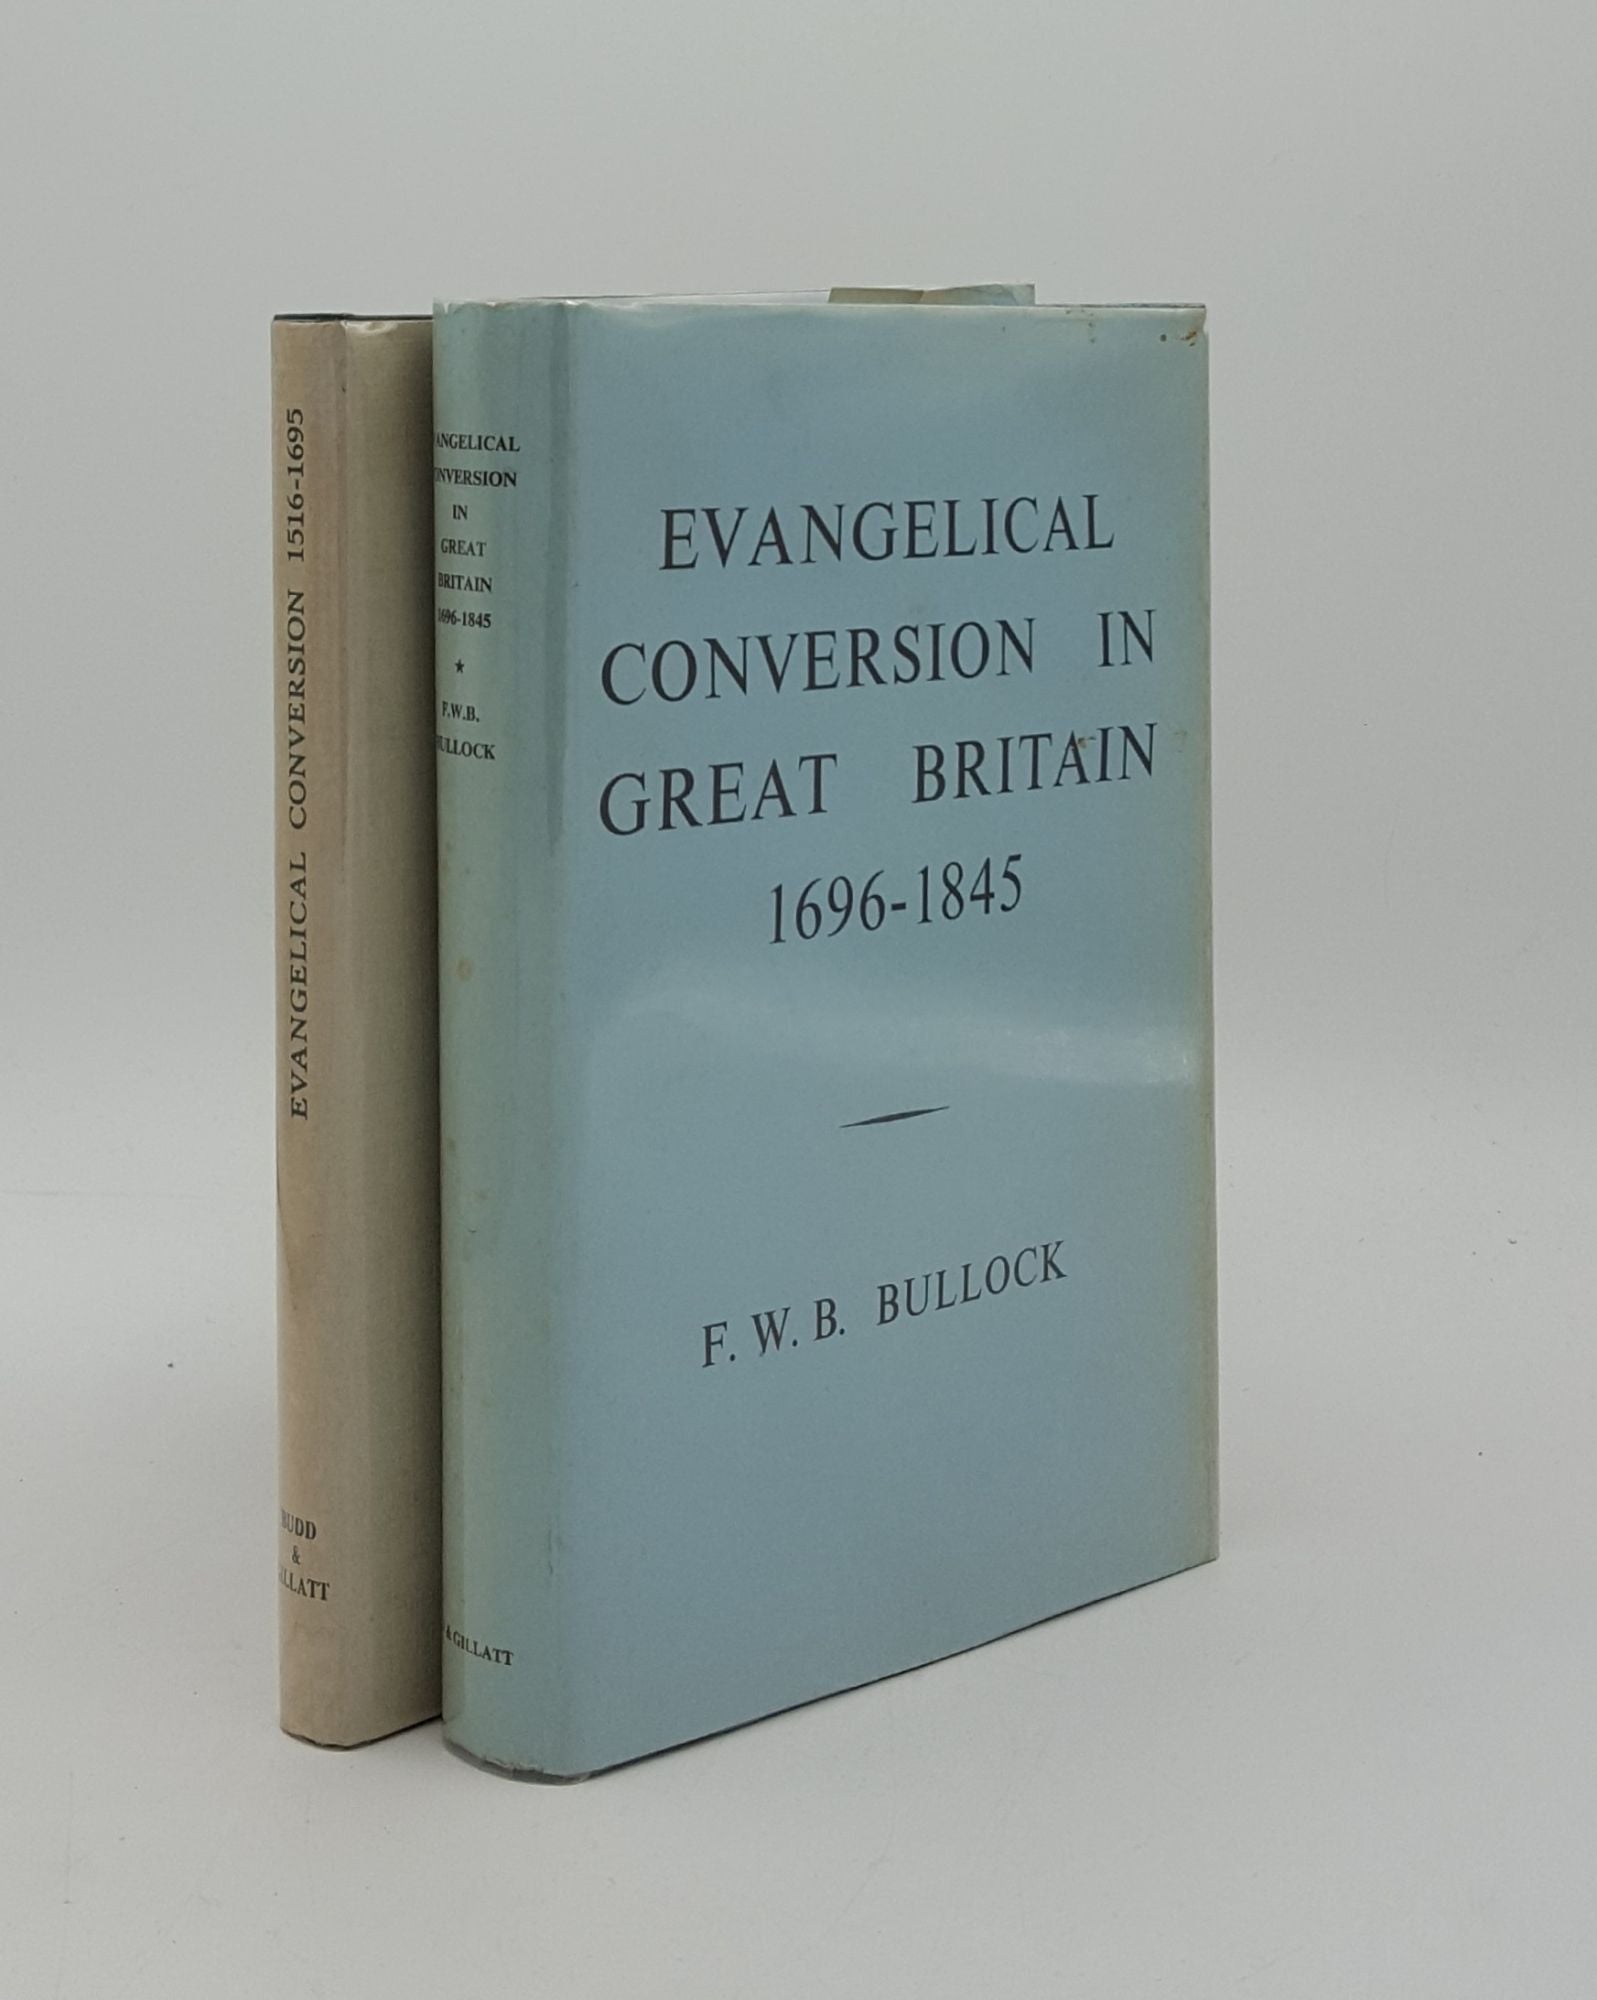 BULLOCK F.W.B. - The Evangelical Conversion of Great Britain 1696-1845 [&] 1516-1695